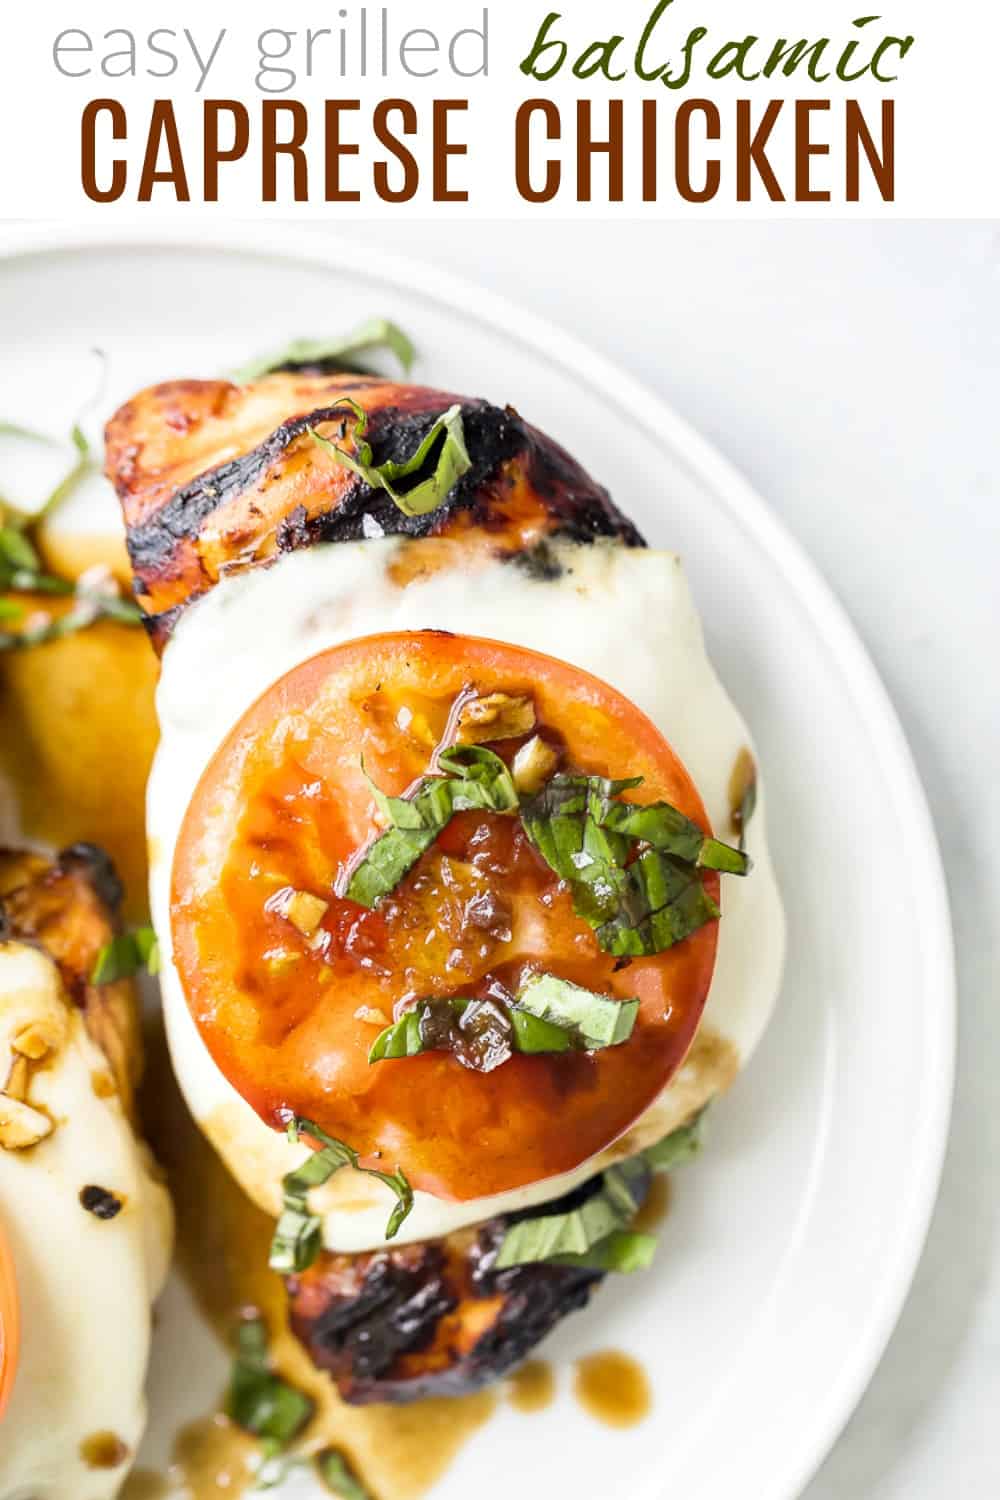 pinterest image for easy grilled balsamic caprese chicken recipe